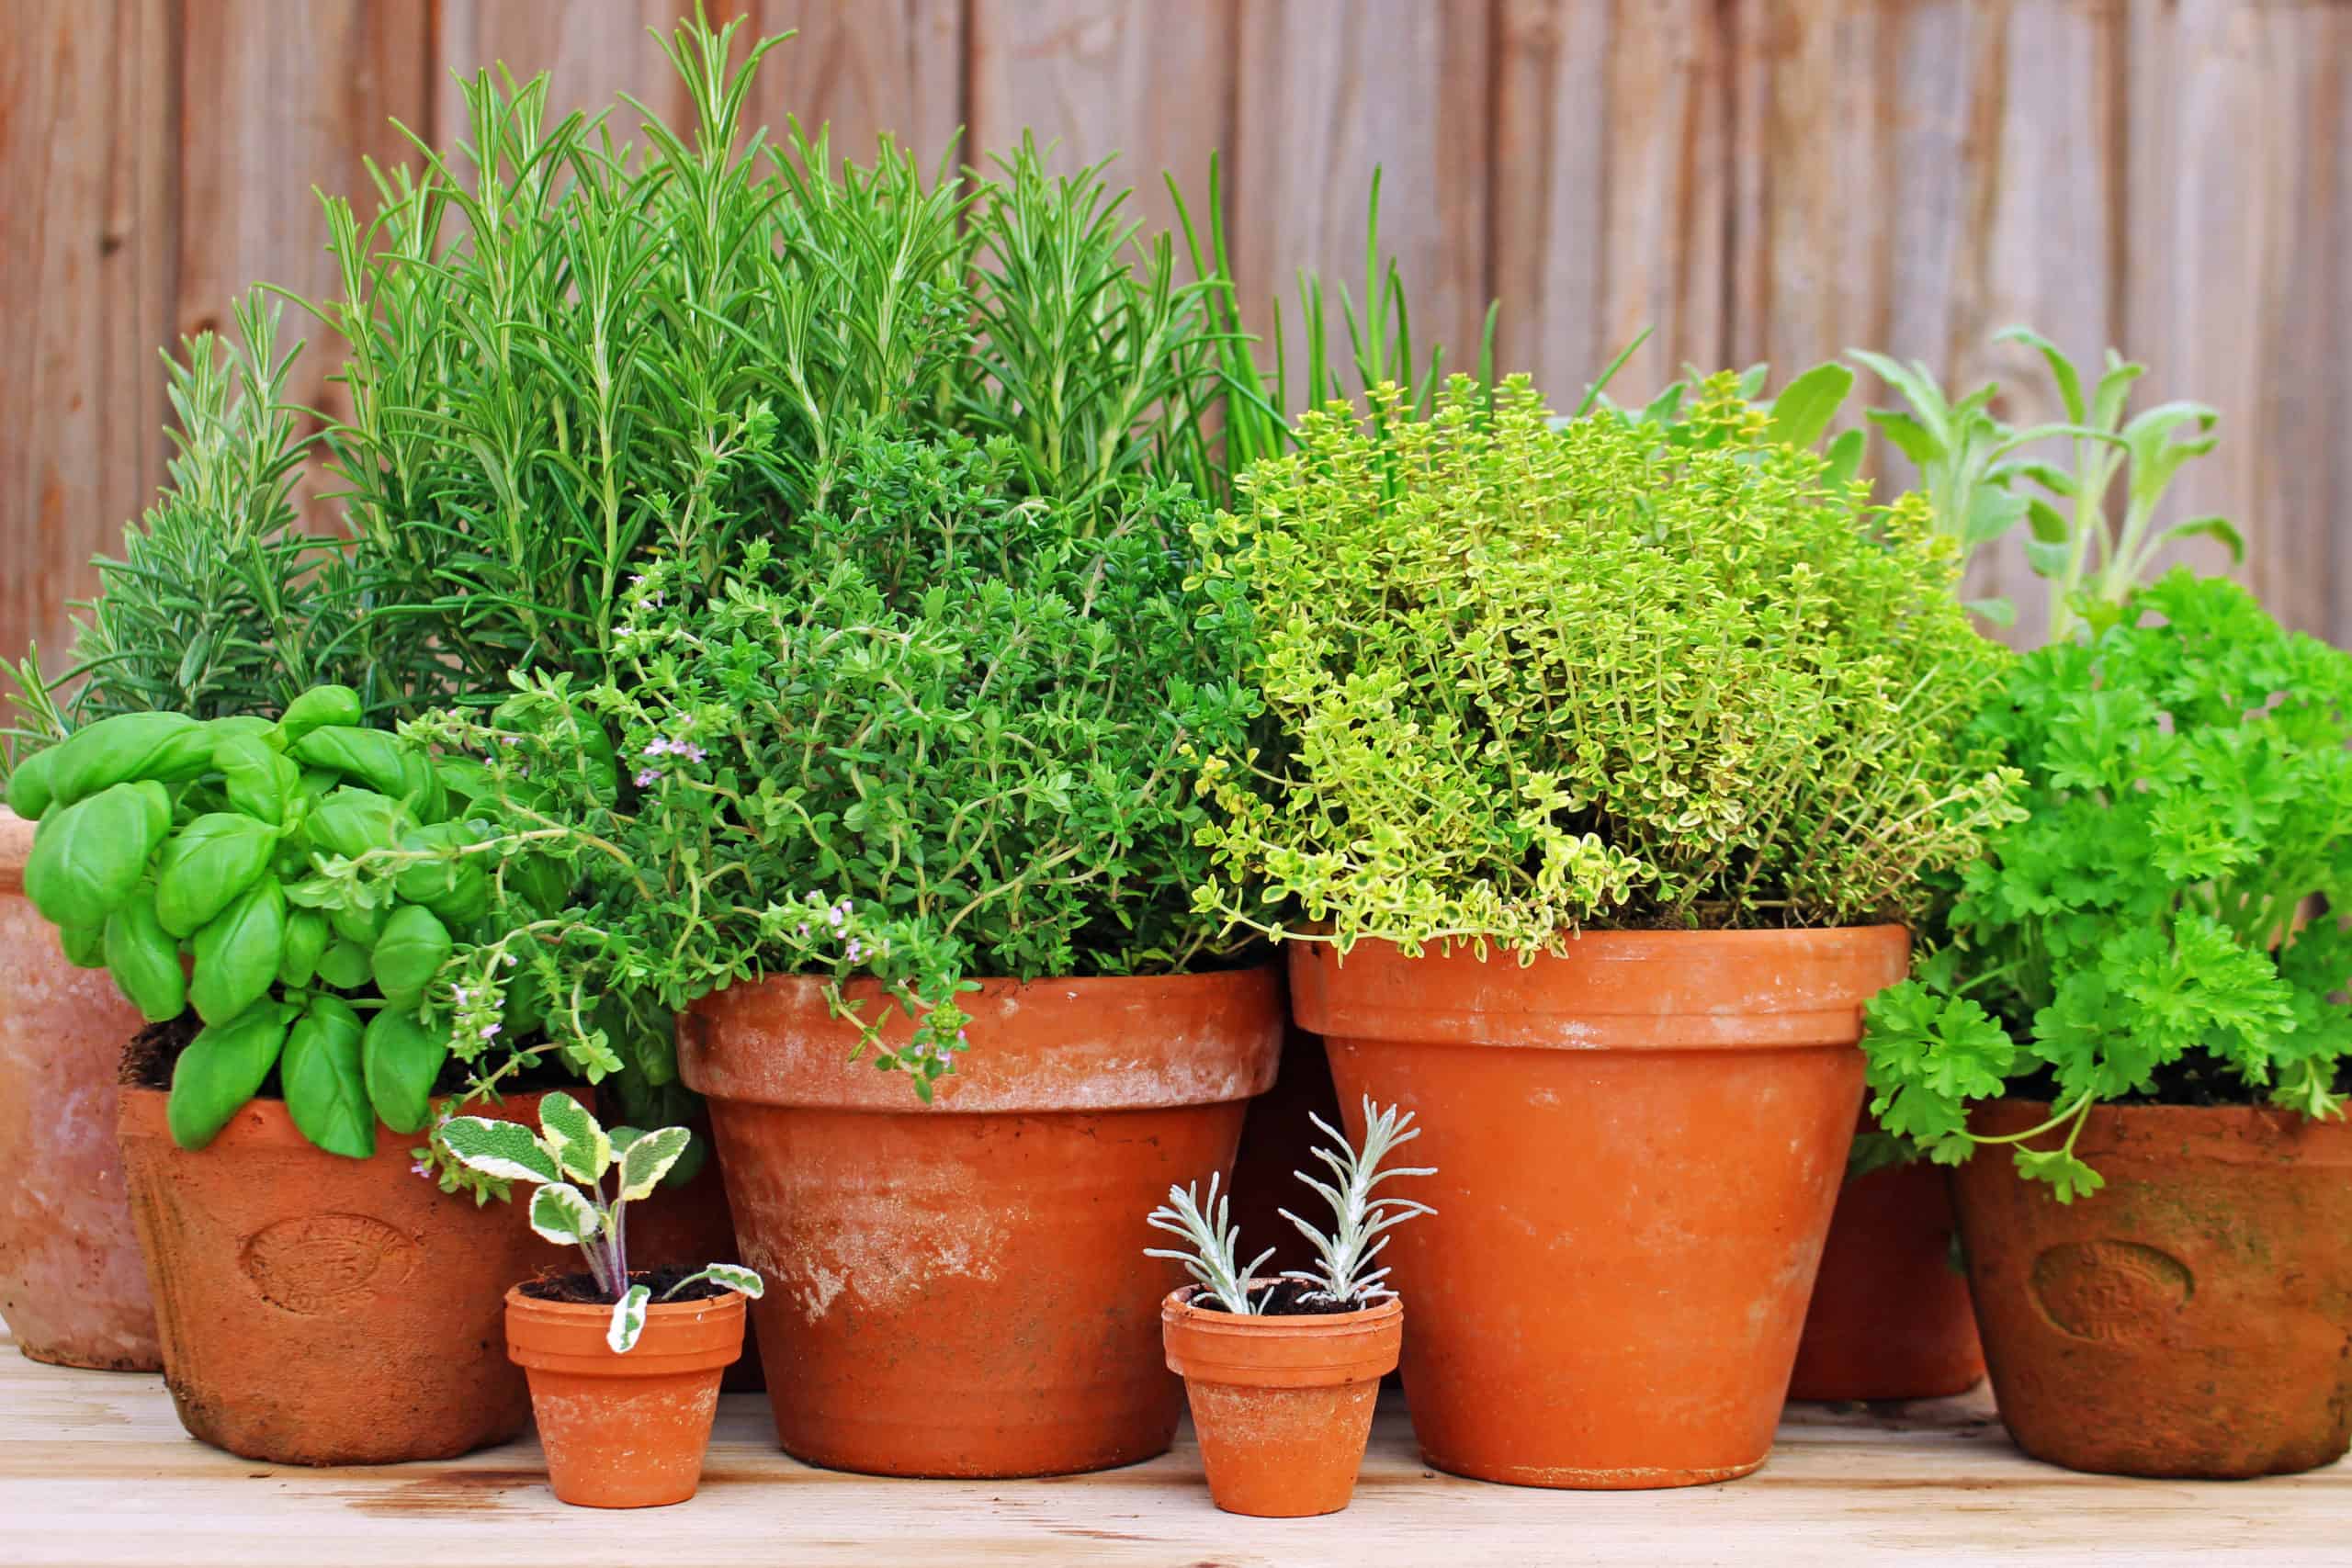 Best Potting Material for Growing Herbs